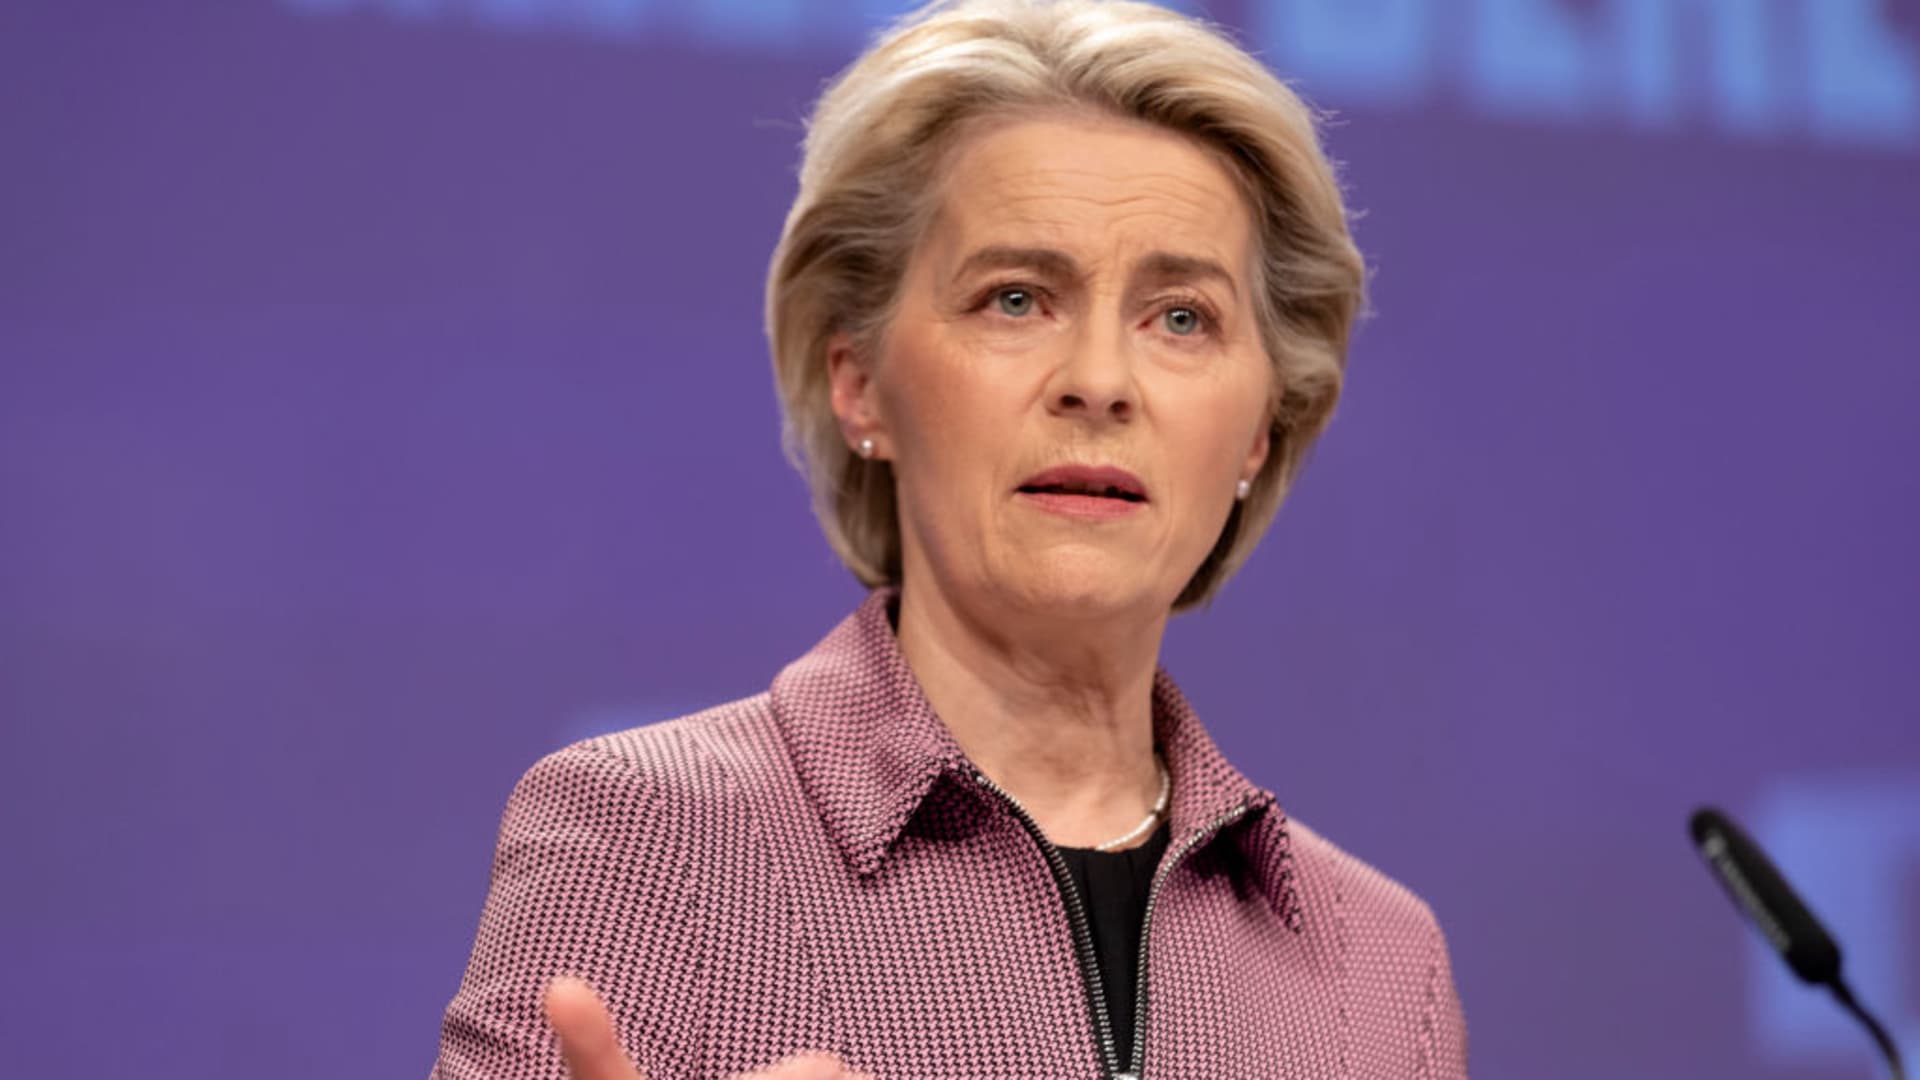 EU Commission's President Ursula von der Leyen holds a press conference ahead the G20 and the COP26 (Glasgow Conference) in the Berlaymont, the EU Commission headquarter on October 28, 2021 in Brussels, Belgium.